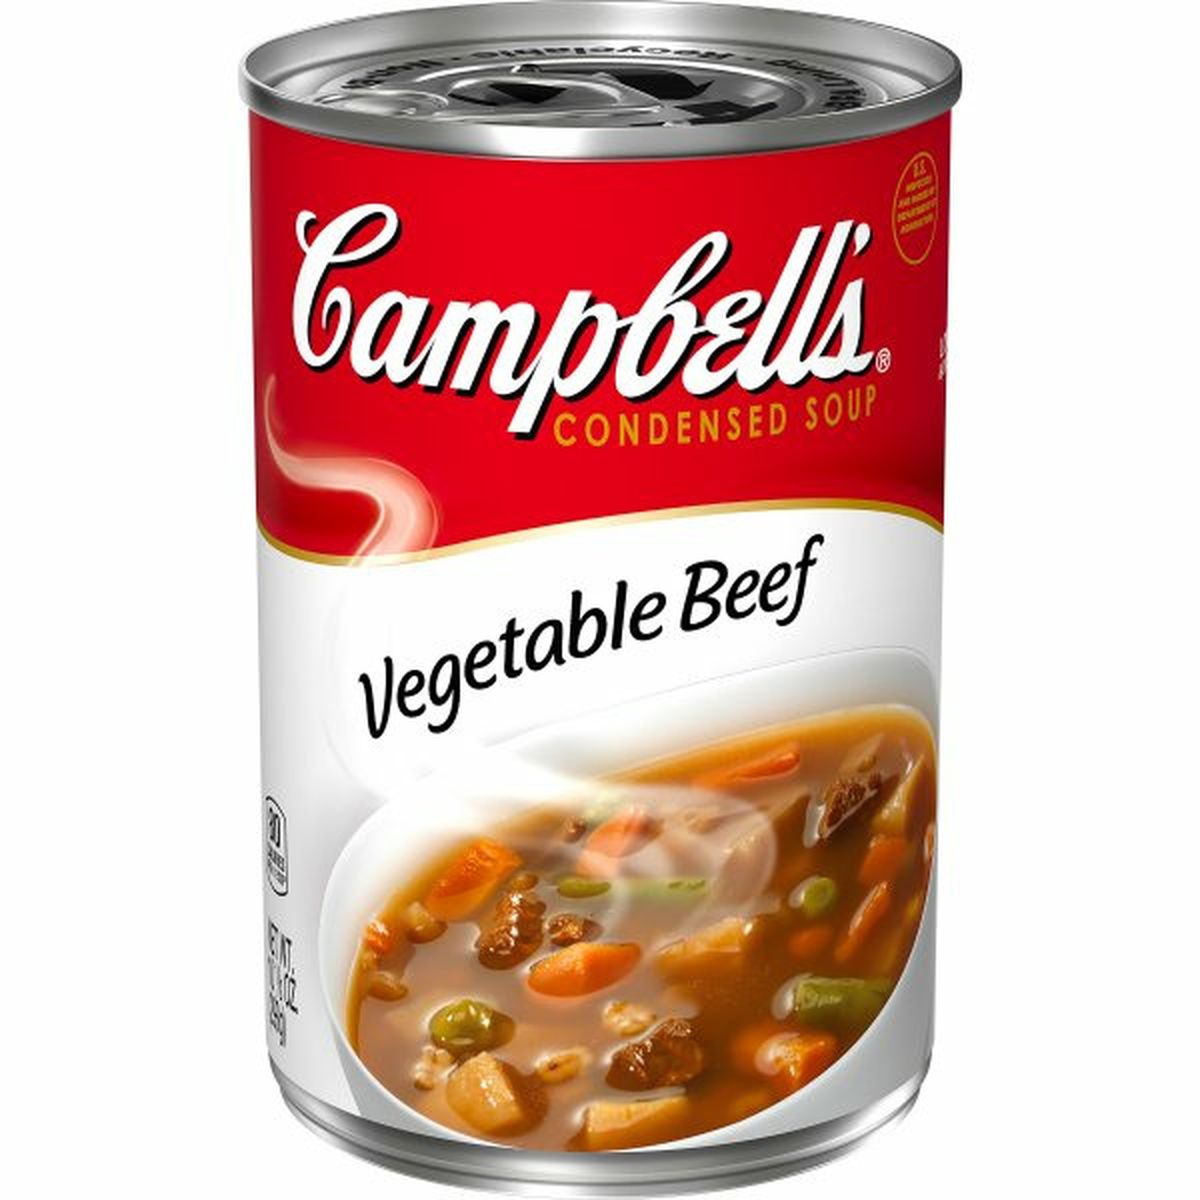 Calories in Campbell'ss Condensed Vegetable Beef Soup